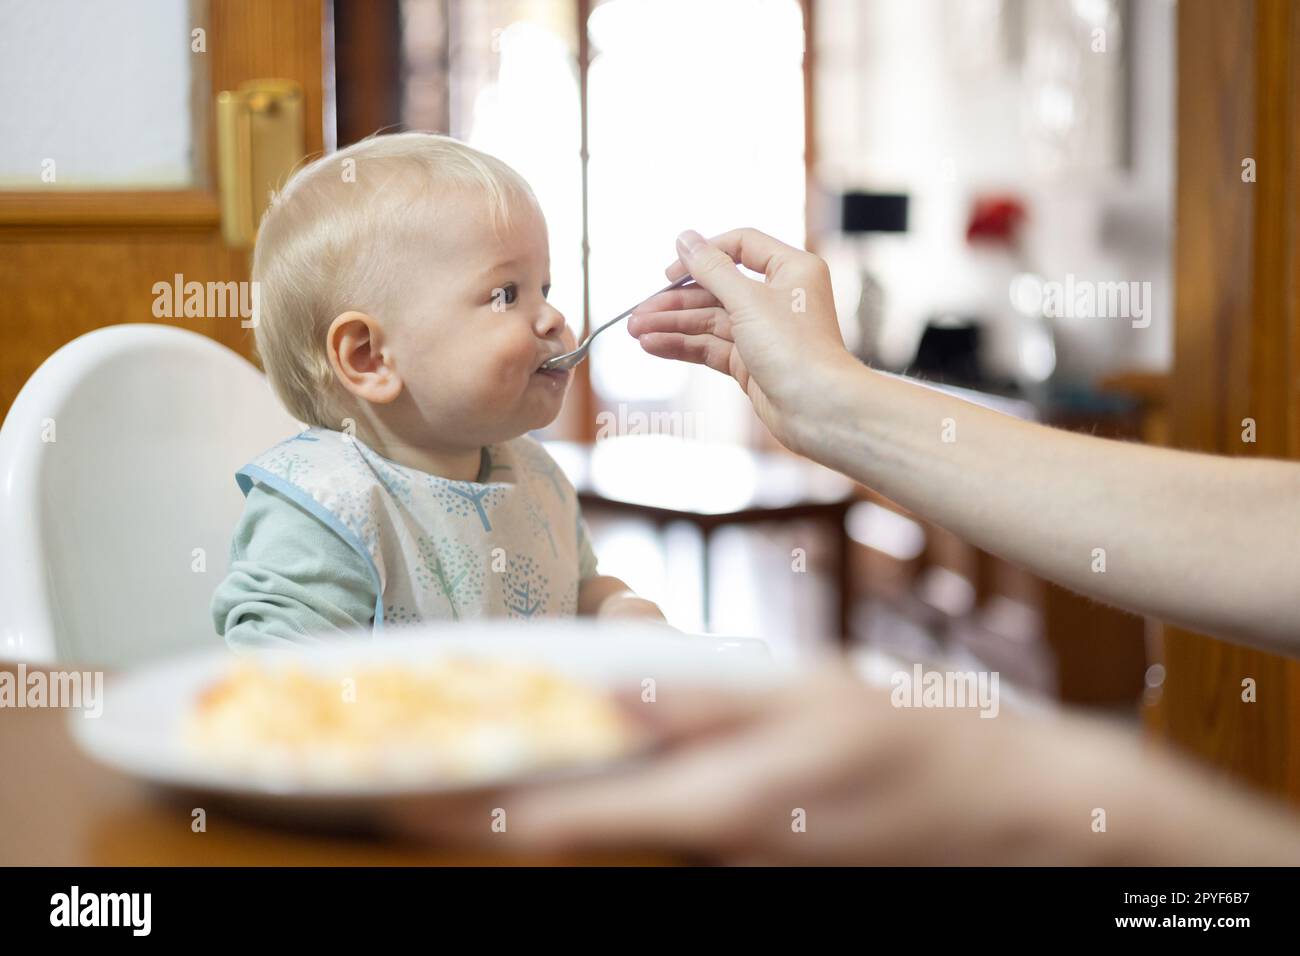 https://c8.alamy.com/comp/2PYF6B7/mother-spoon-feeding-her-infant-baby-boy-child-sitting-in-high-chair-at-the-dining-table-in-kitchen-at-home-2PYF6B7.jpg